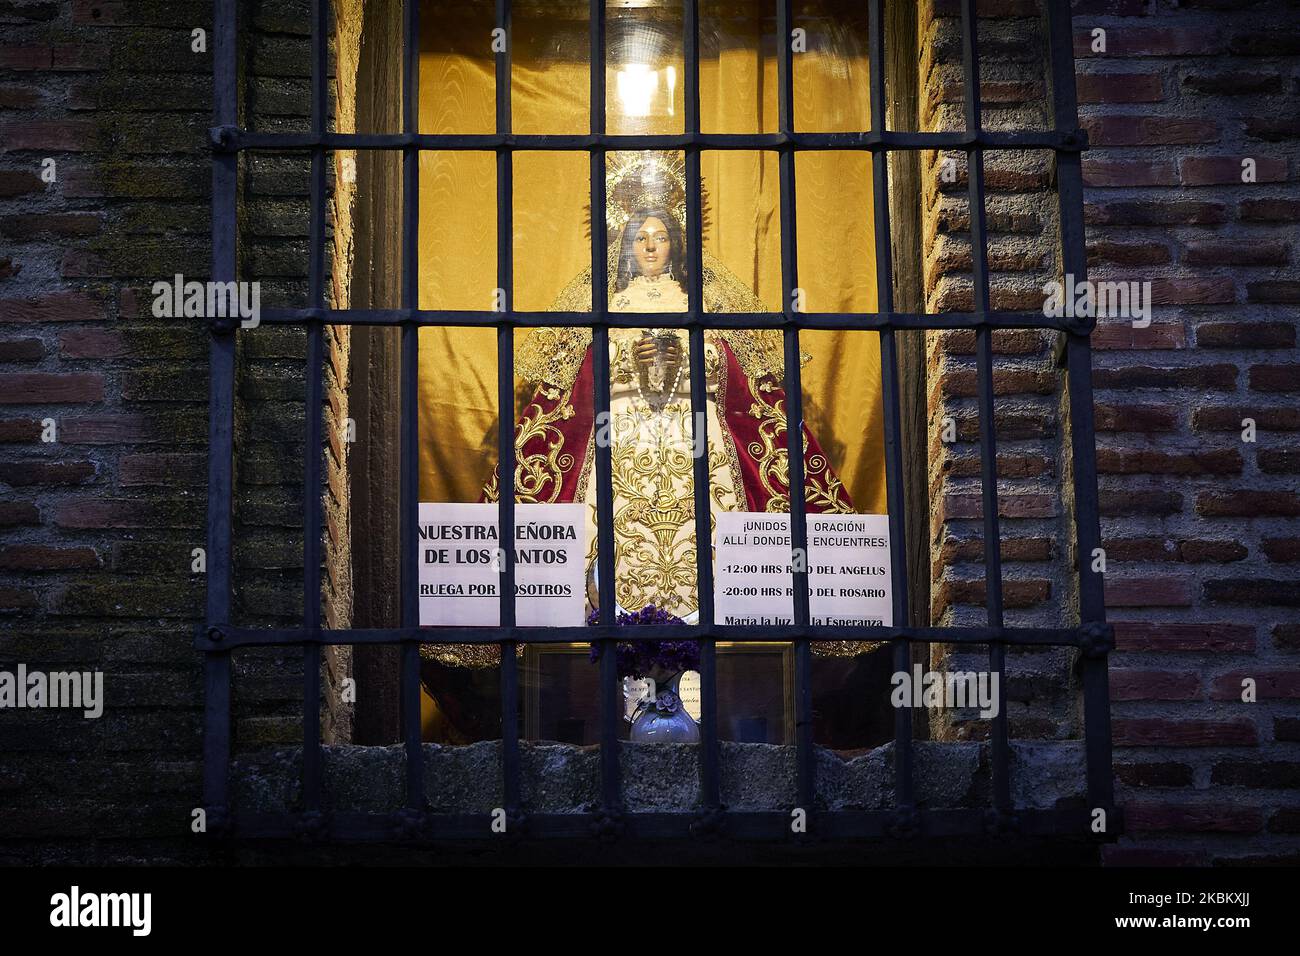 Altar to the Virgin Mary. At Ermita de Nuestra Senora de los Santos, a small image of the Virgen Mary has been placed in one of the windows to pray for the sick people in Mostoles, Spain. April 02, 2020. (Photo by A. Ware/NurPhoto) Stock Photo